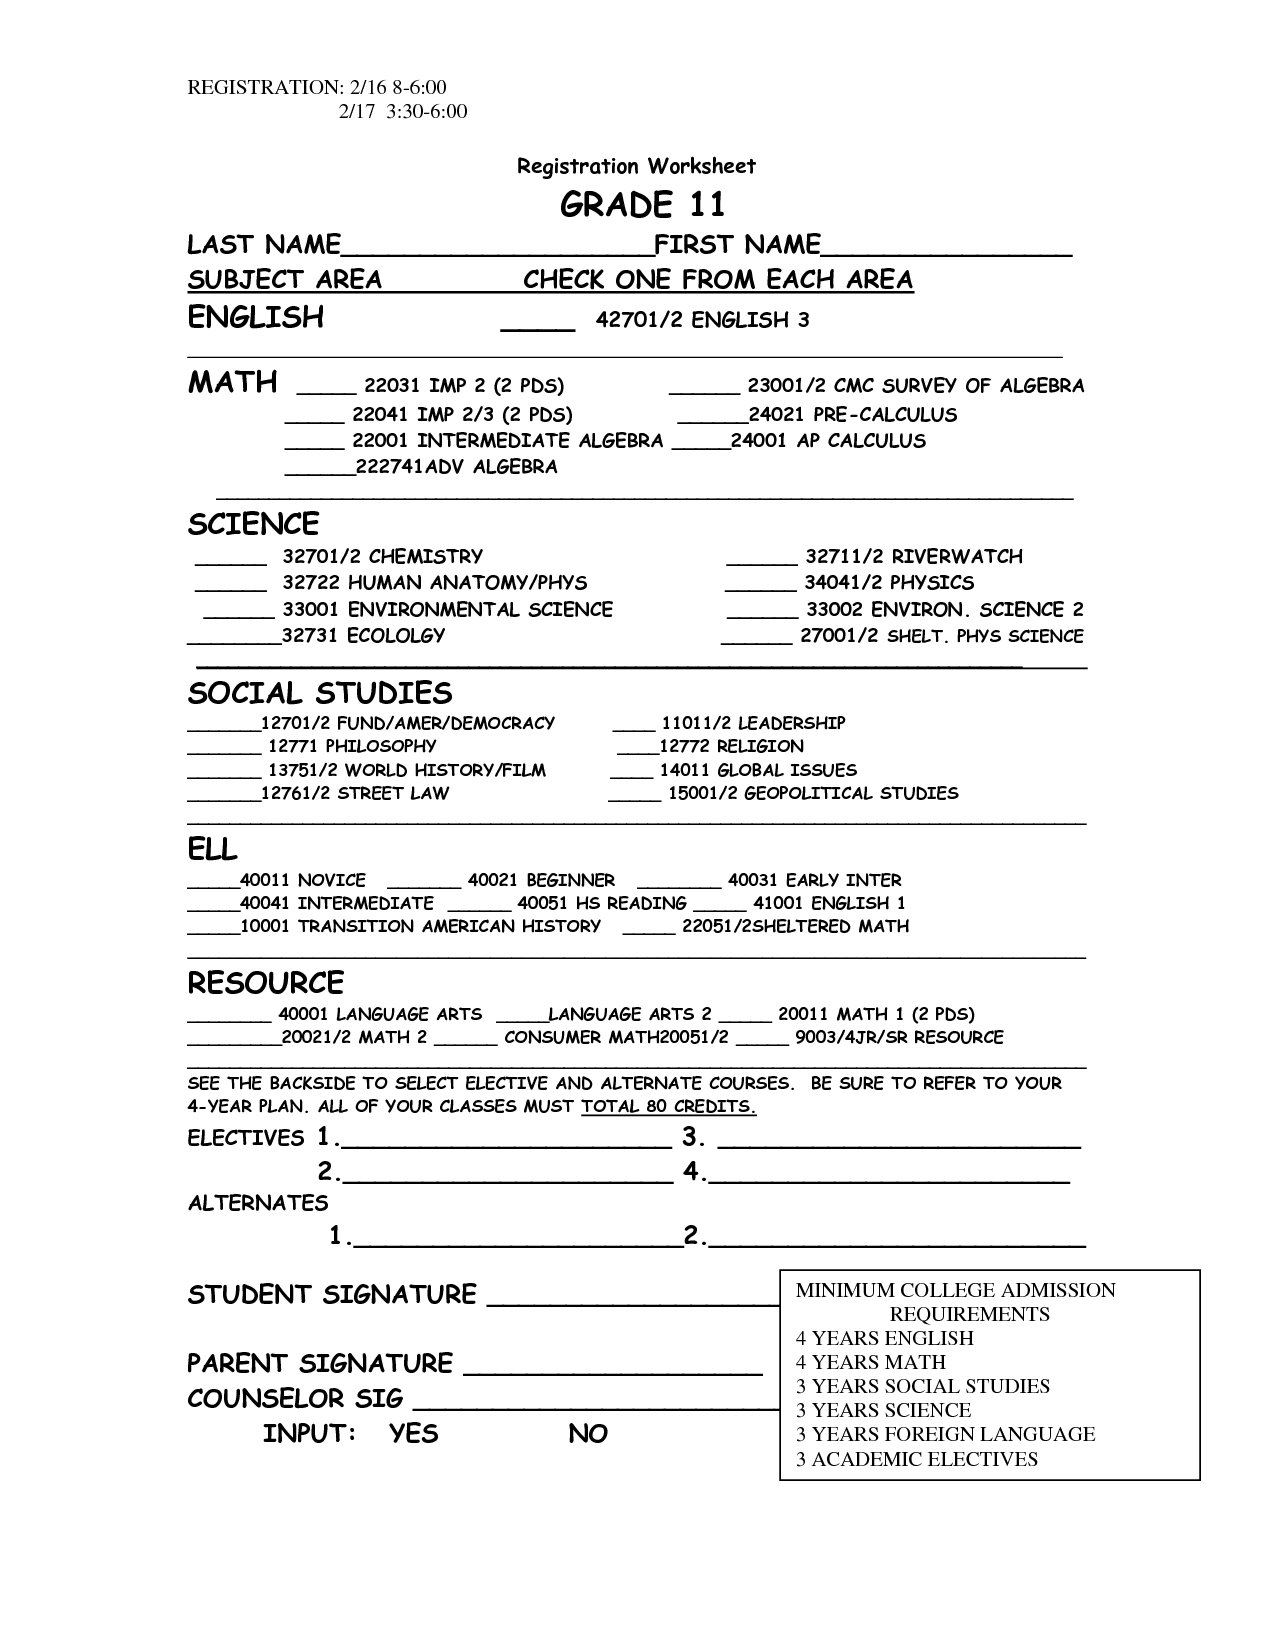 11th Grade Math Problems Worksheets Image